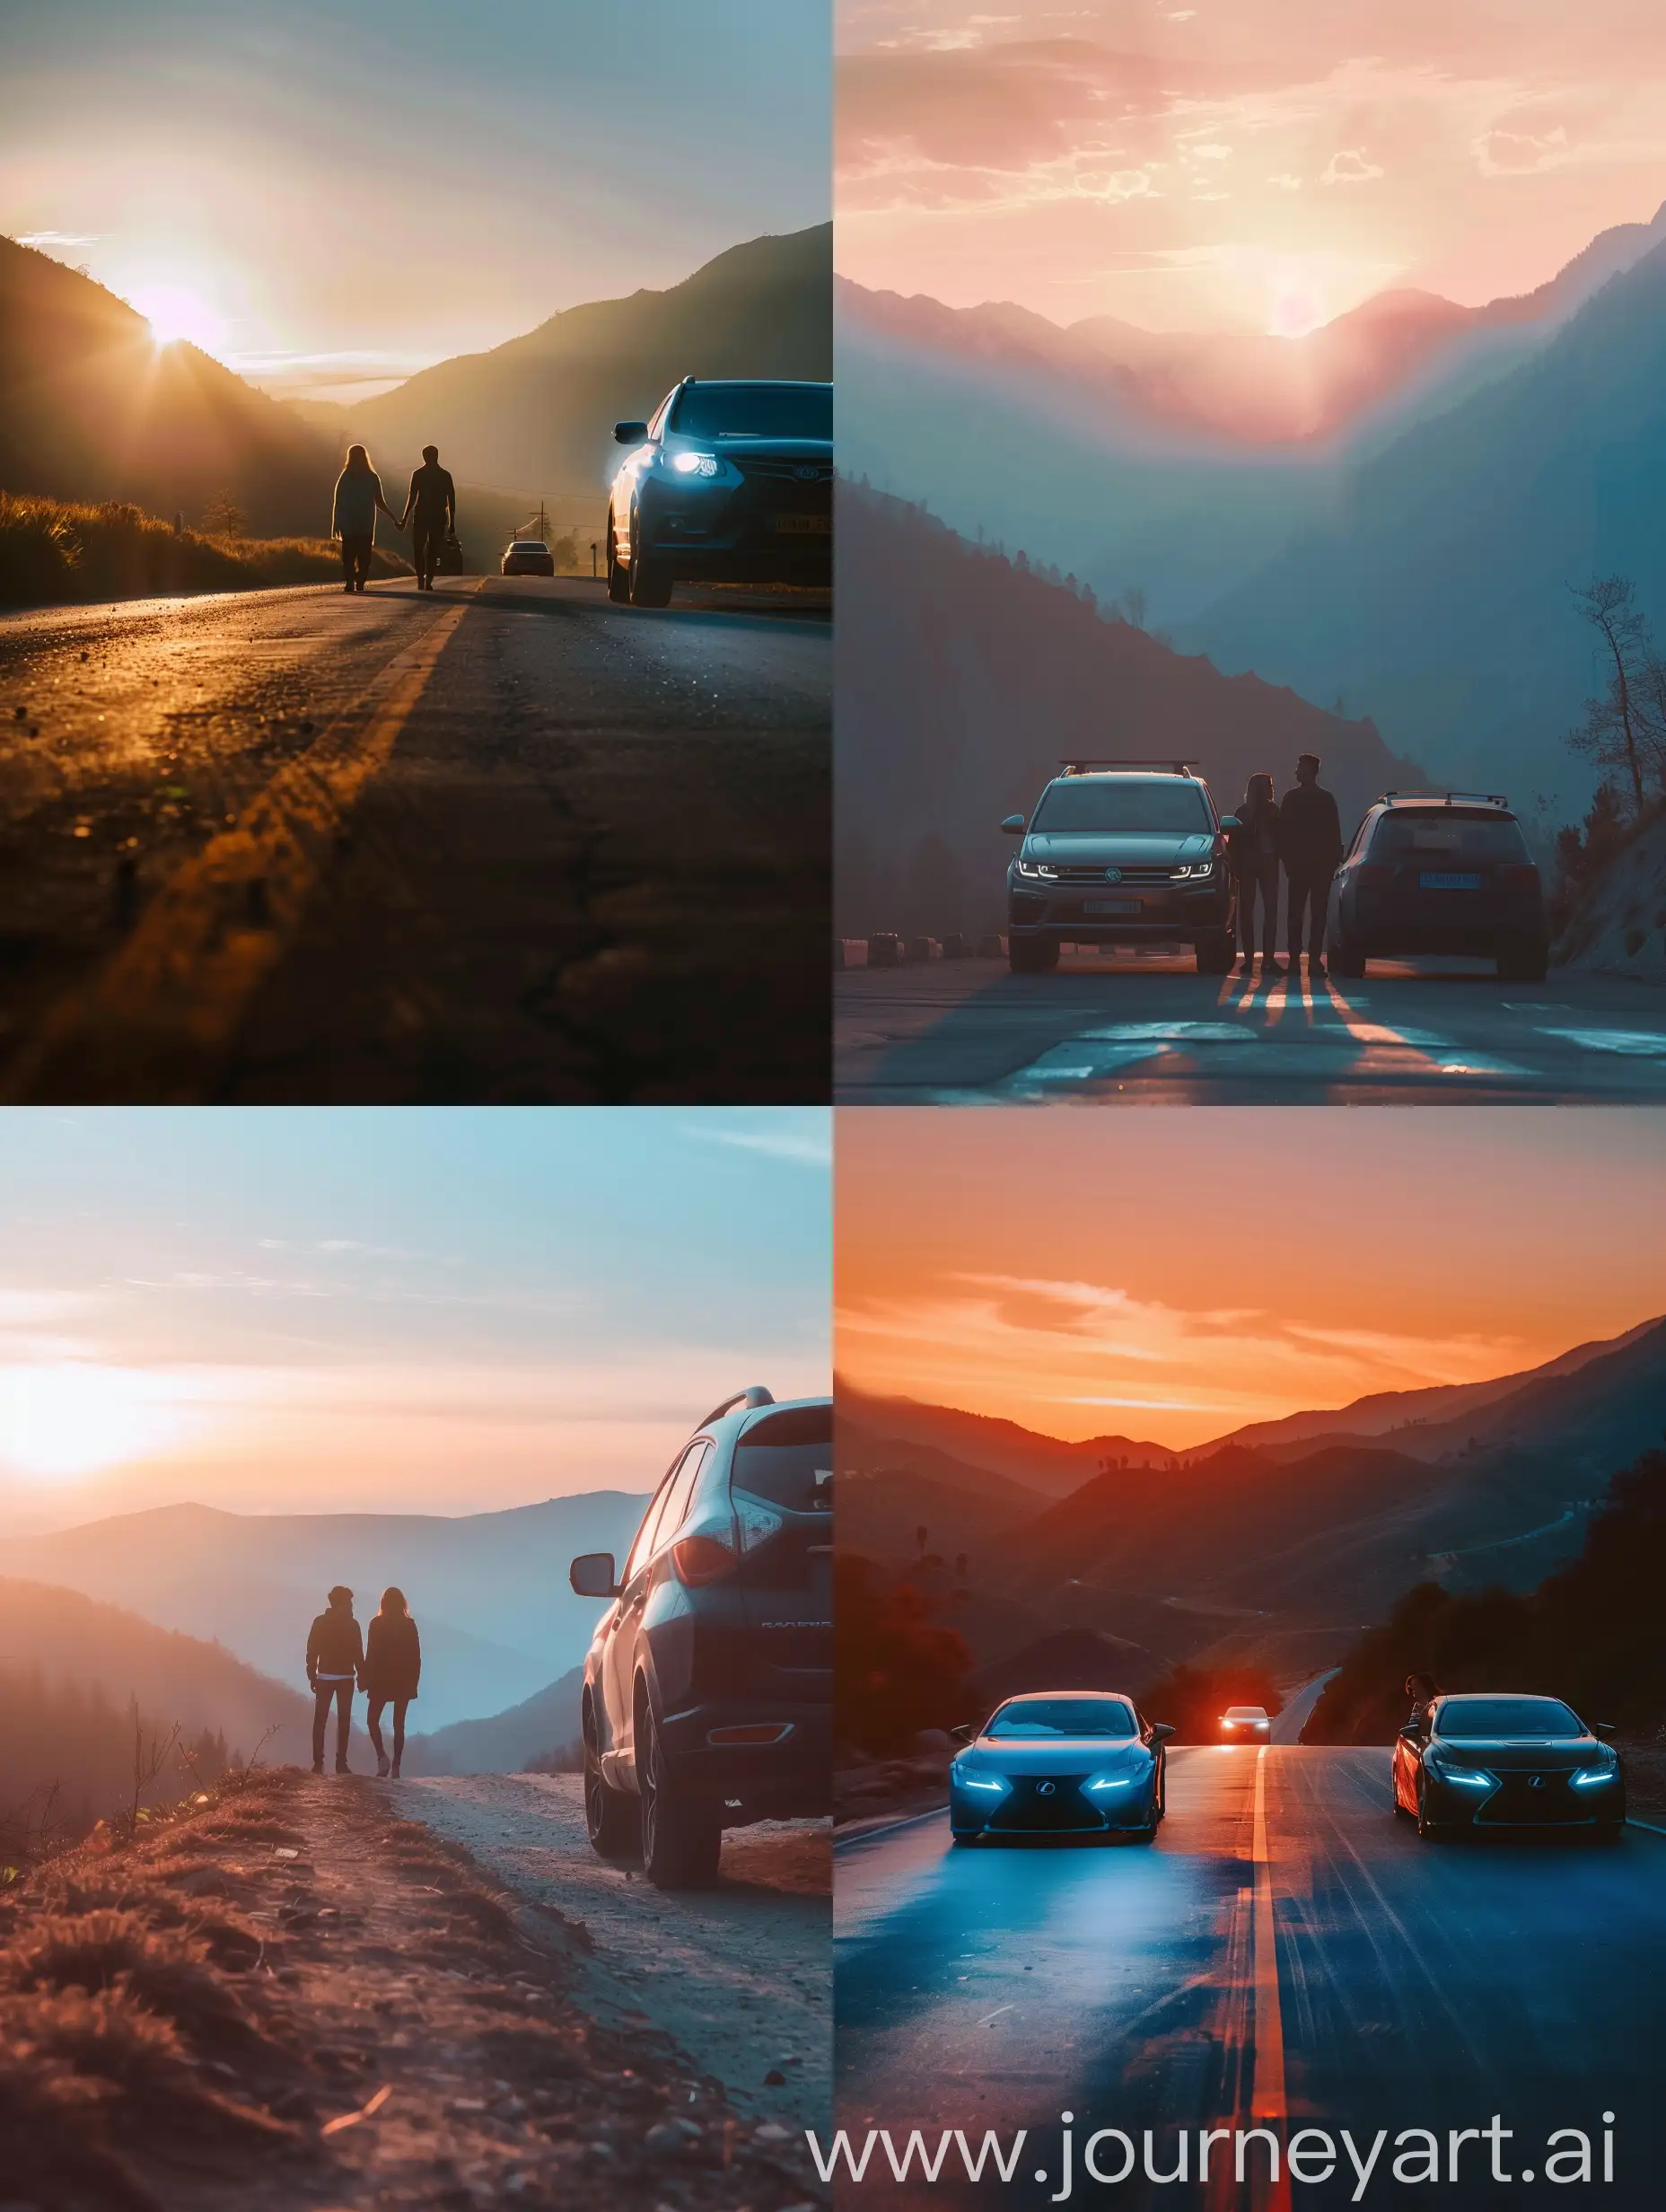 Romantic-Couple-Embracing-at-Sunset-with-Mountain-Silhouette-and-Car-in-Foreground